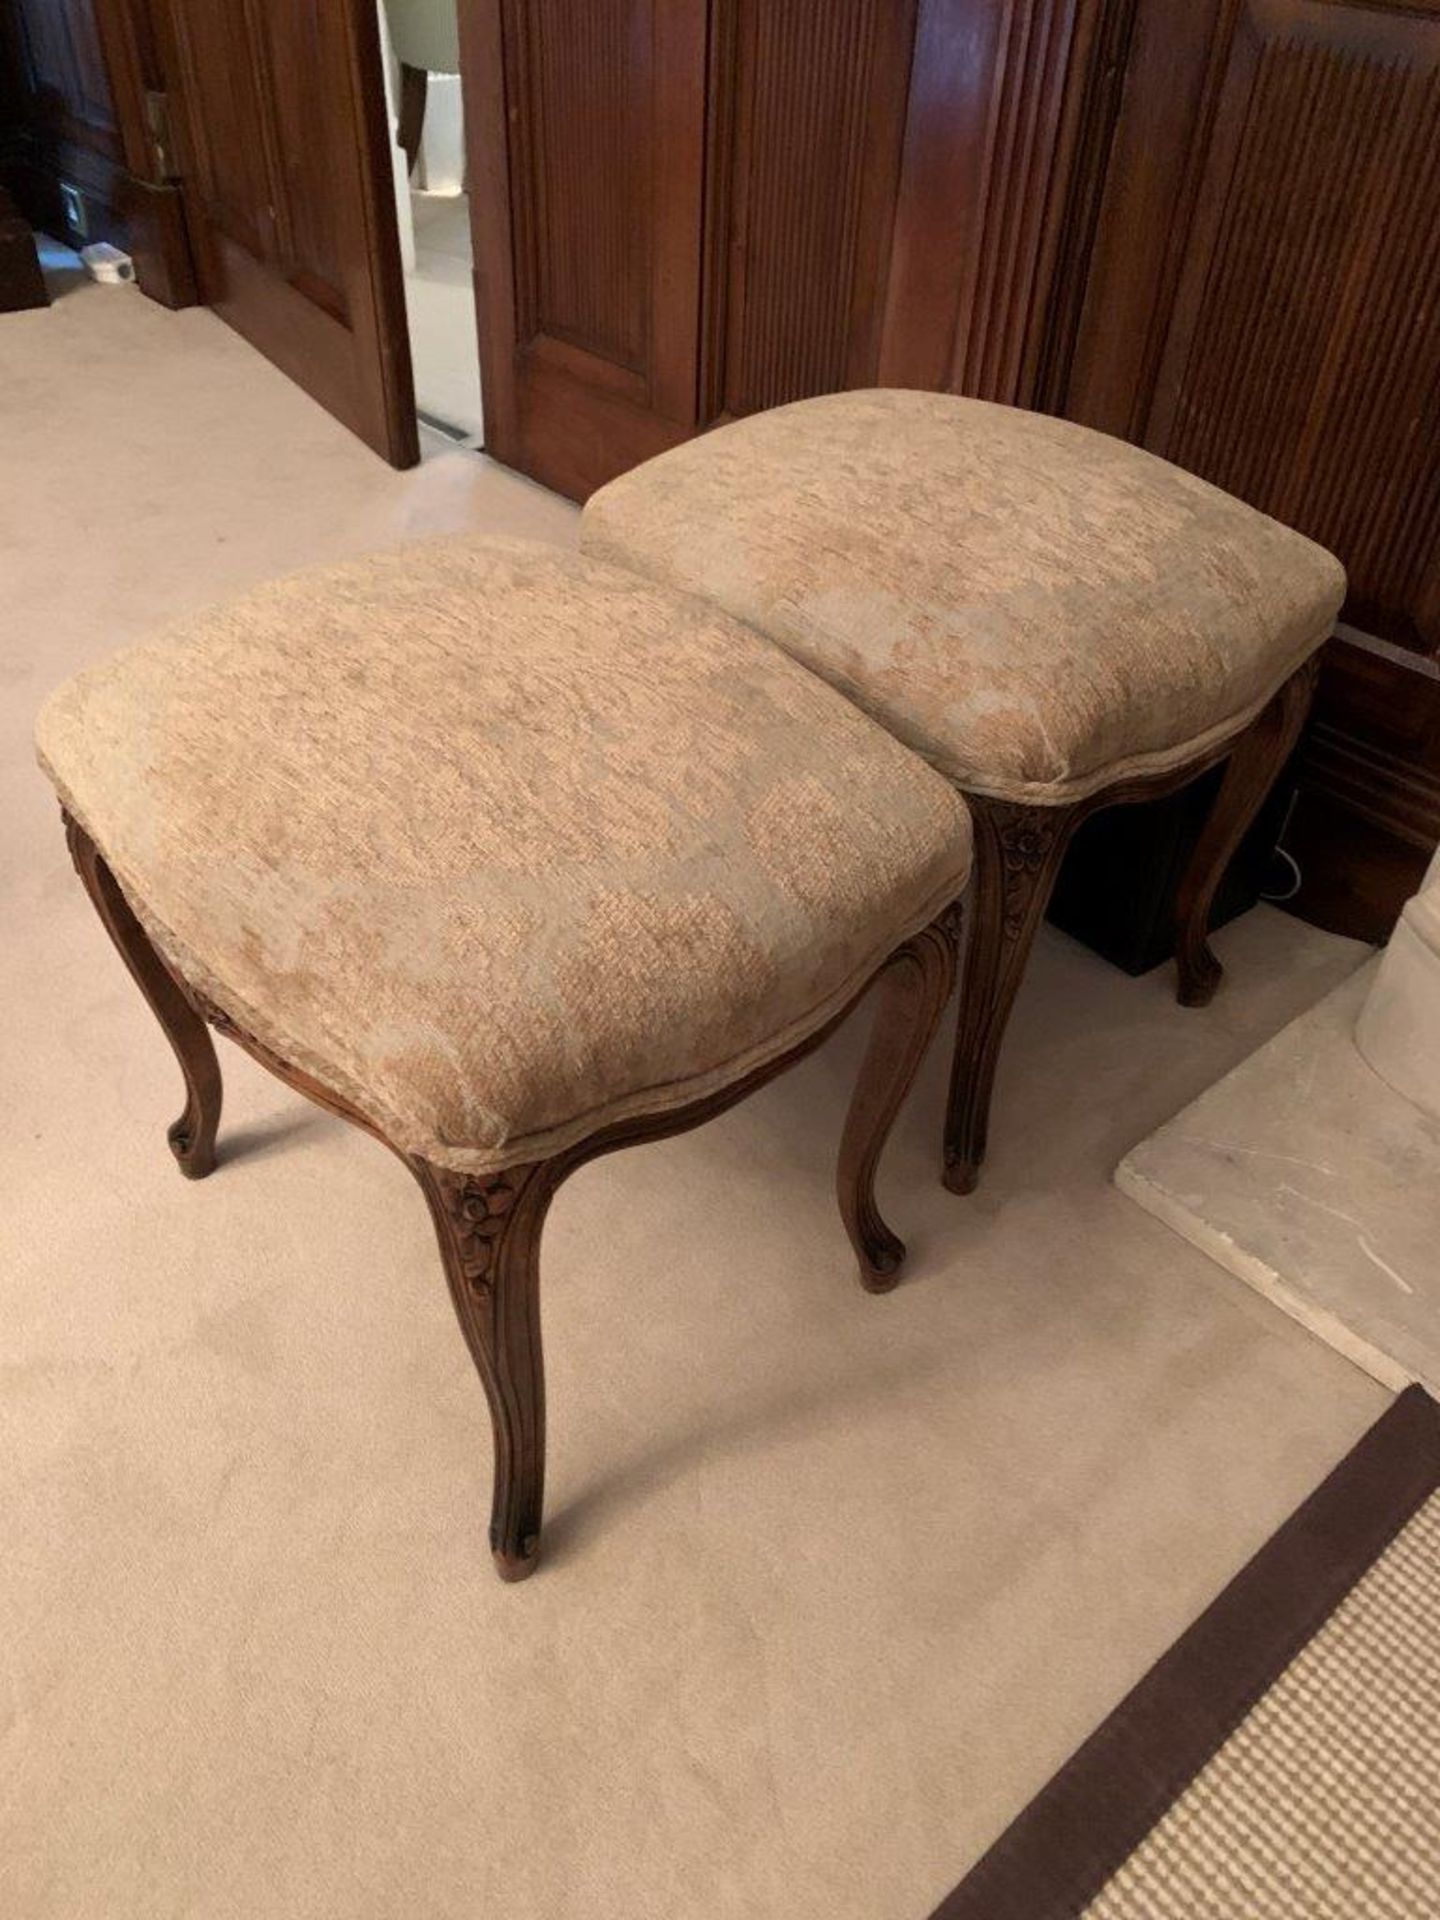 Pair of French style carved stools with upholstered seats - Image 3 of 3